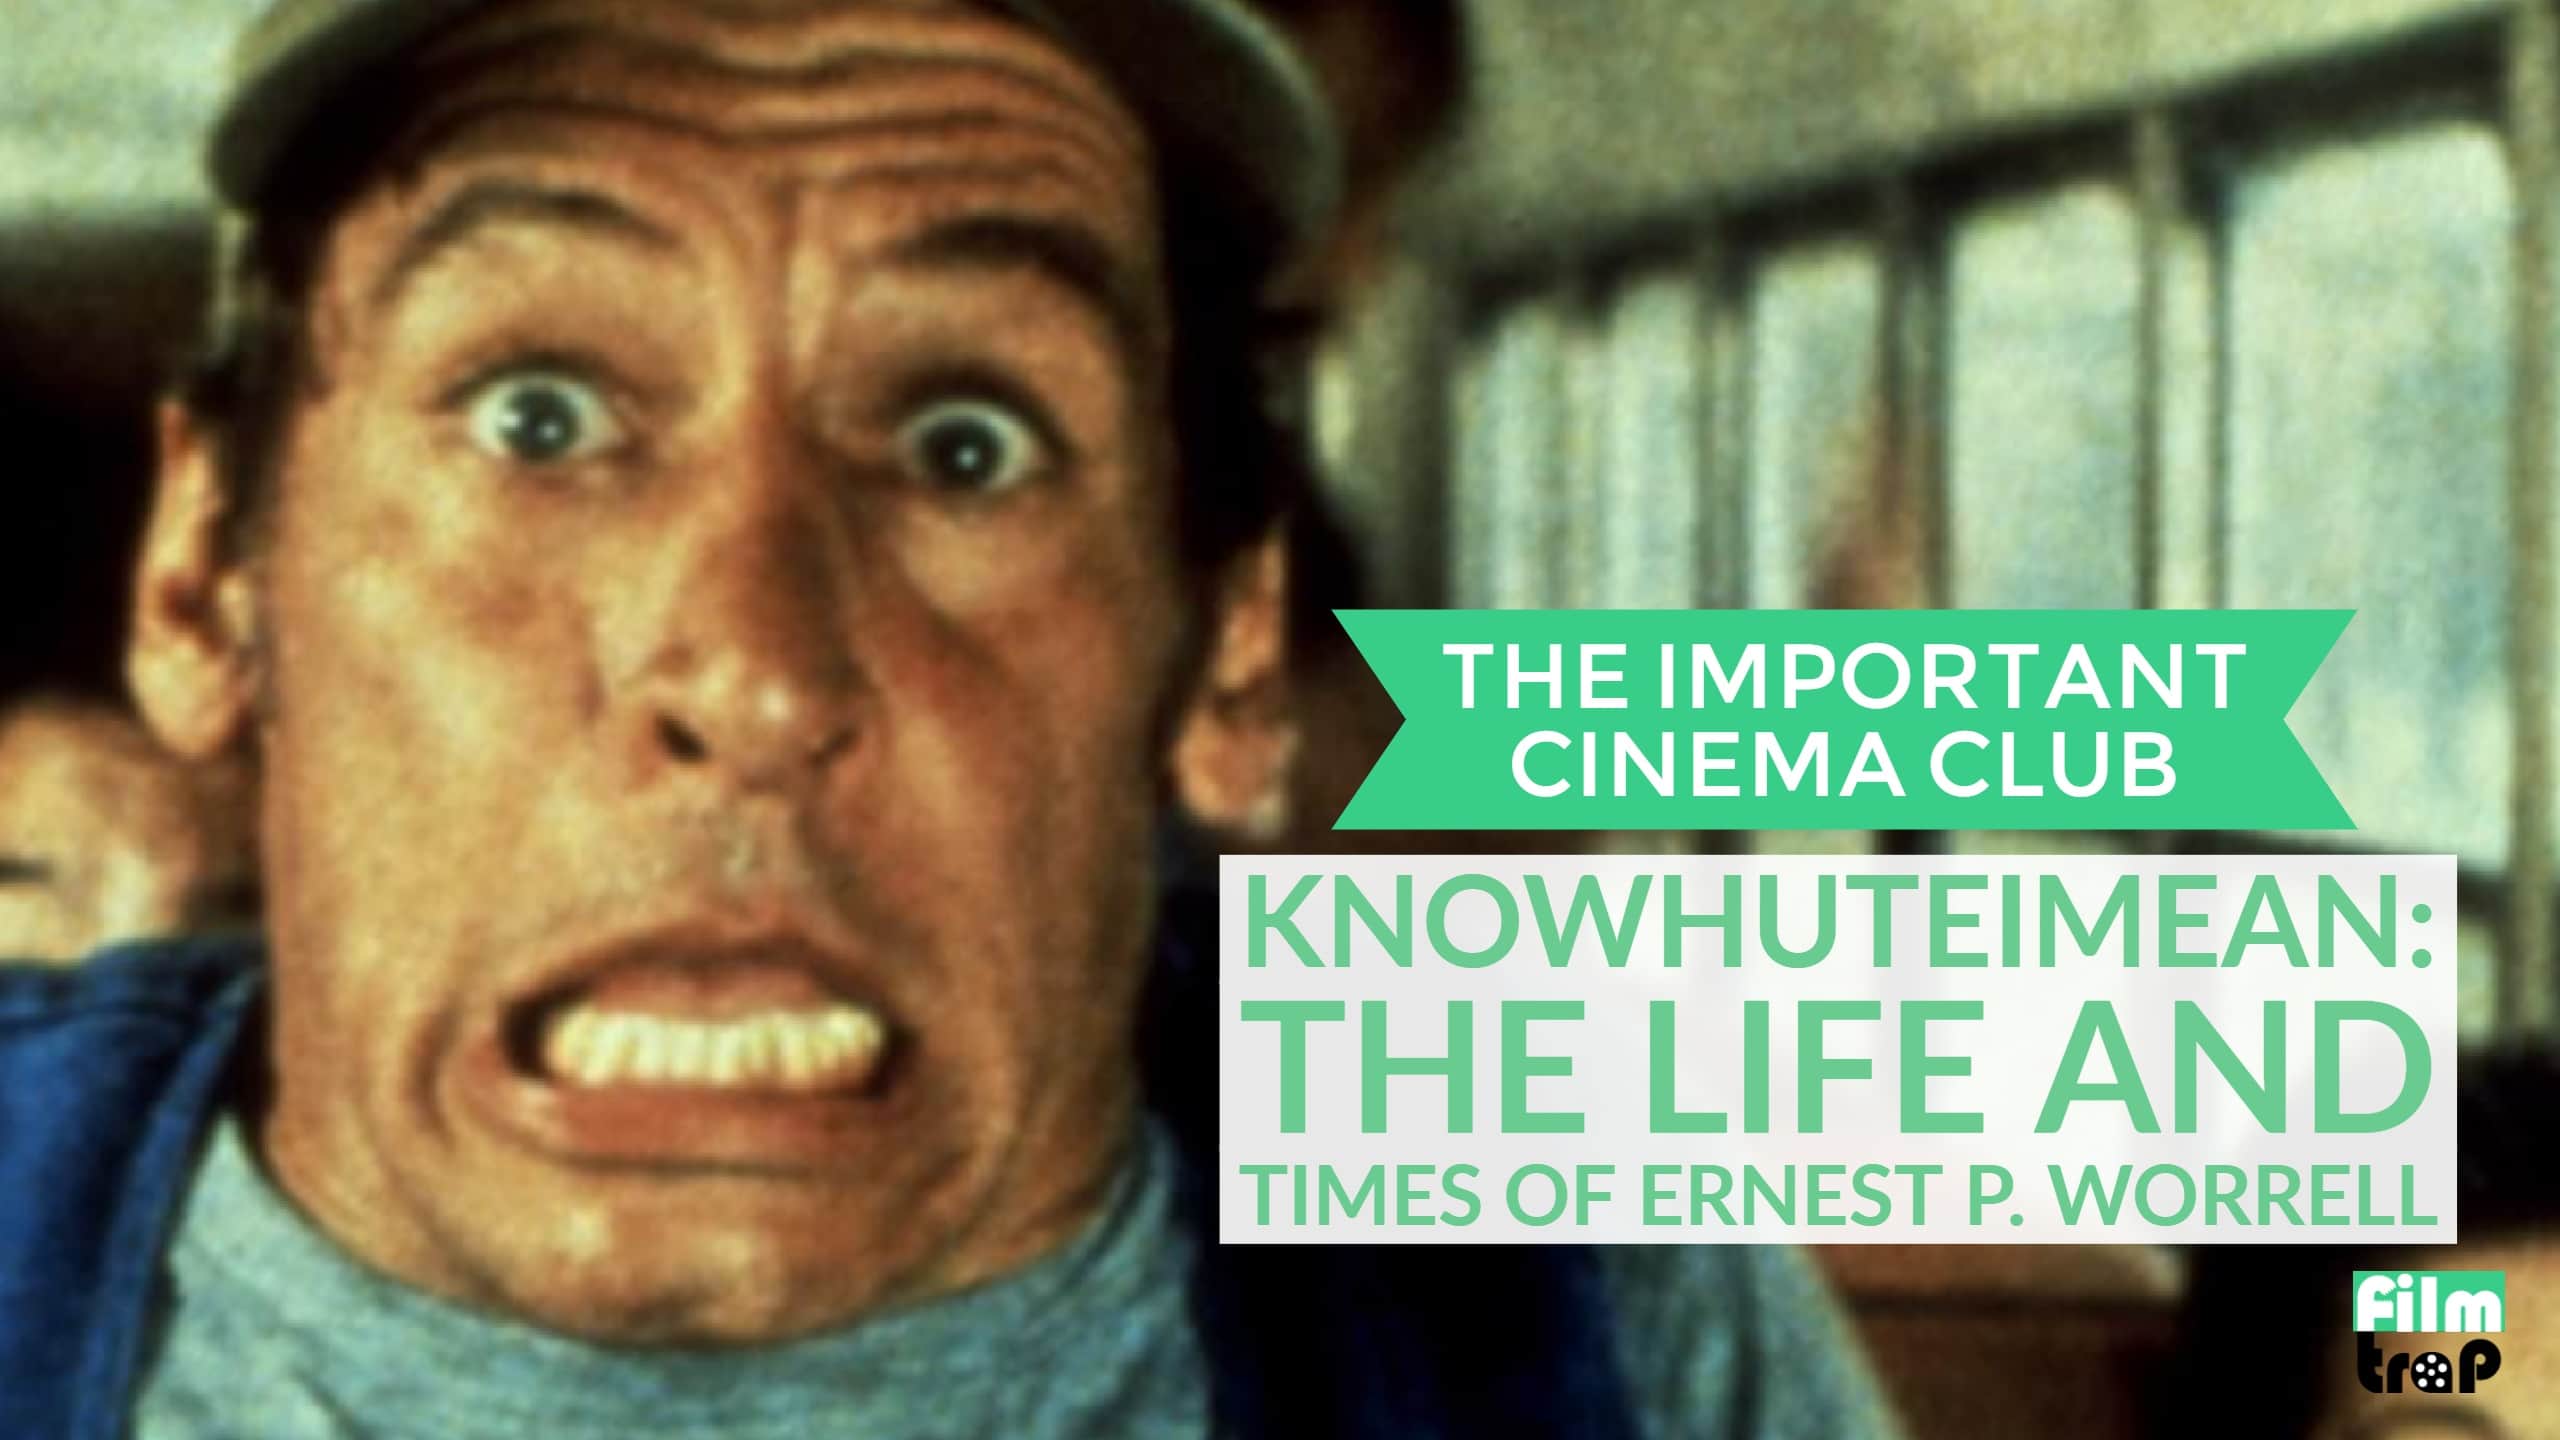 ICC #99 – KnowhuteIMean: The Life And Times Of Ernest P. Worrell